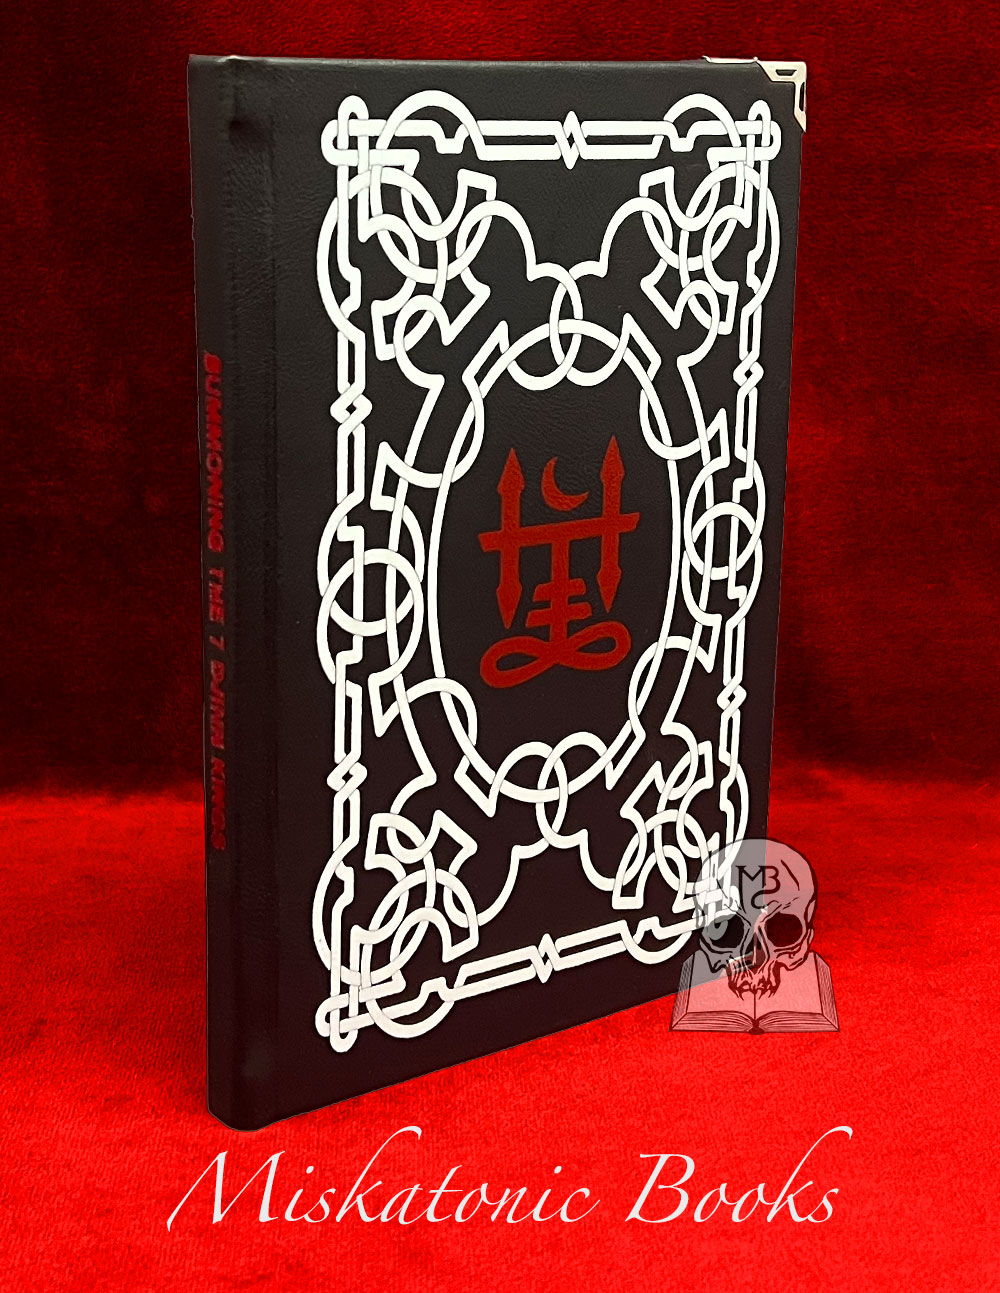 SUMMONING THE 7 DJINN KINGS by Etu Malku - Deluxe Leather Bound Limited Edition with Altar Cloth